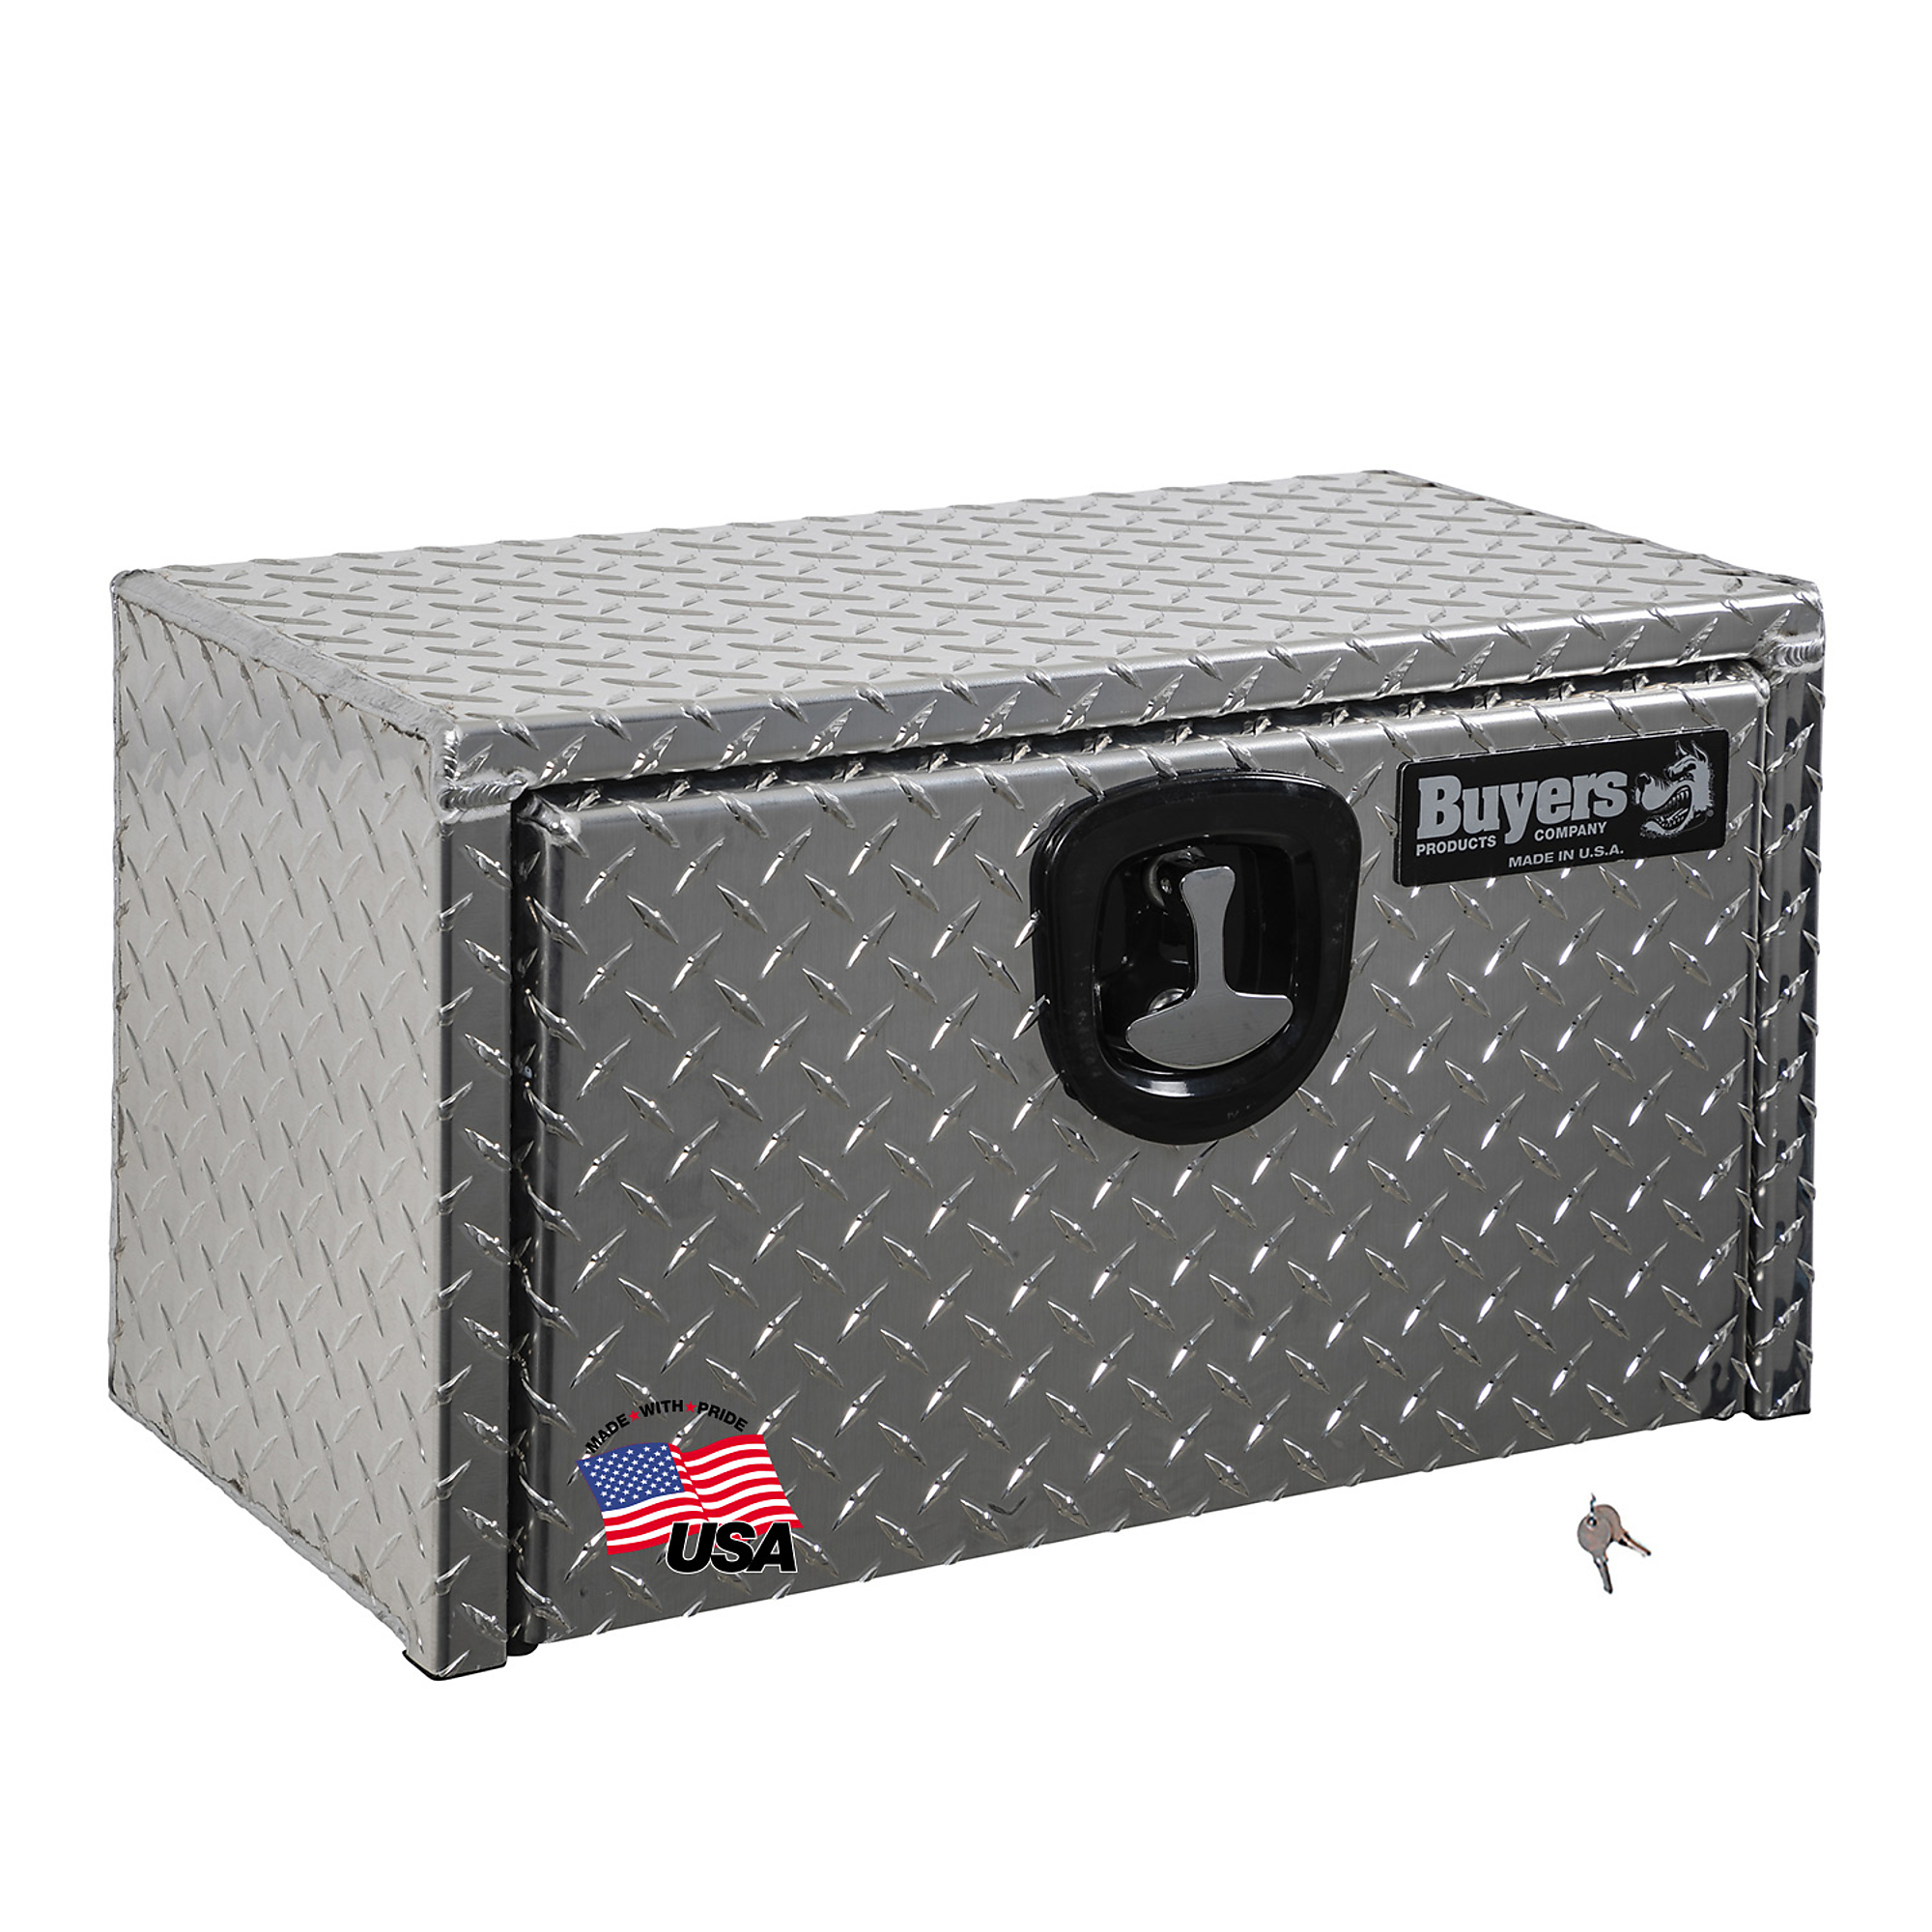 Buyers Products, Underbody Truck Box, Width 16 in, Material Aluminum, Color Finish Diamond Plate Silver, Model 1705148